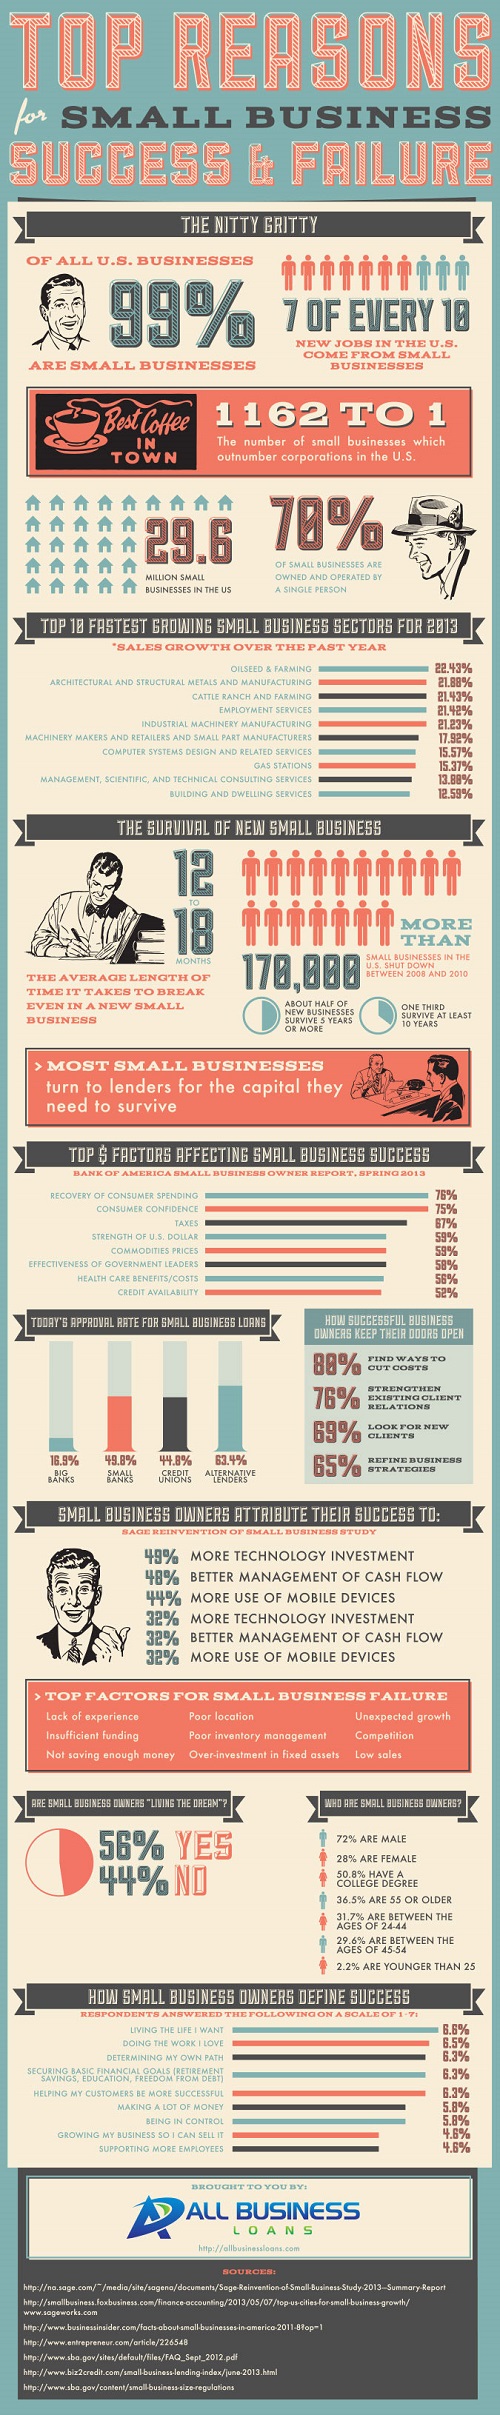 small-business-success-and-failure